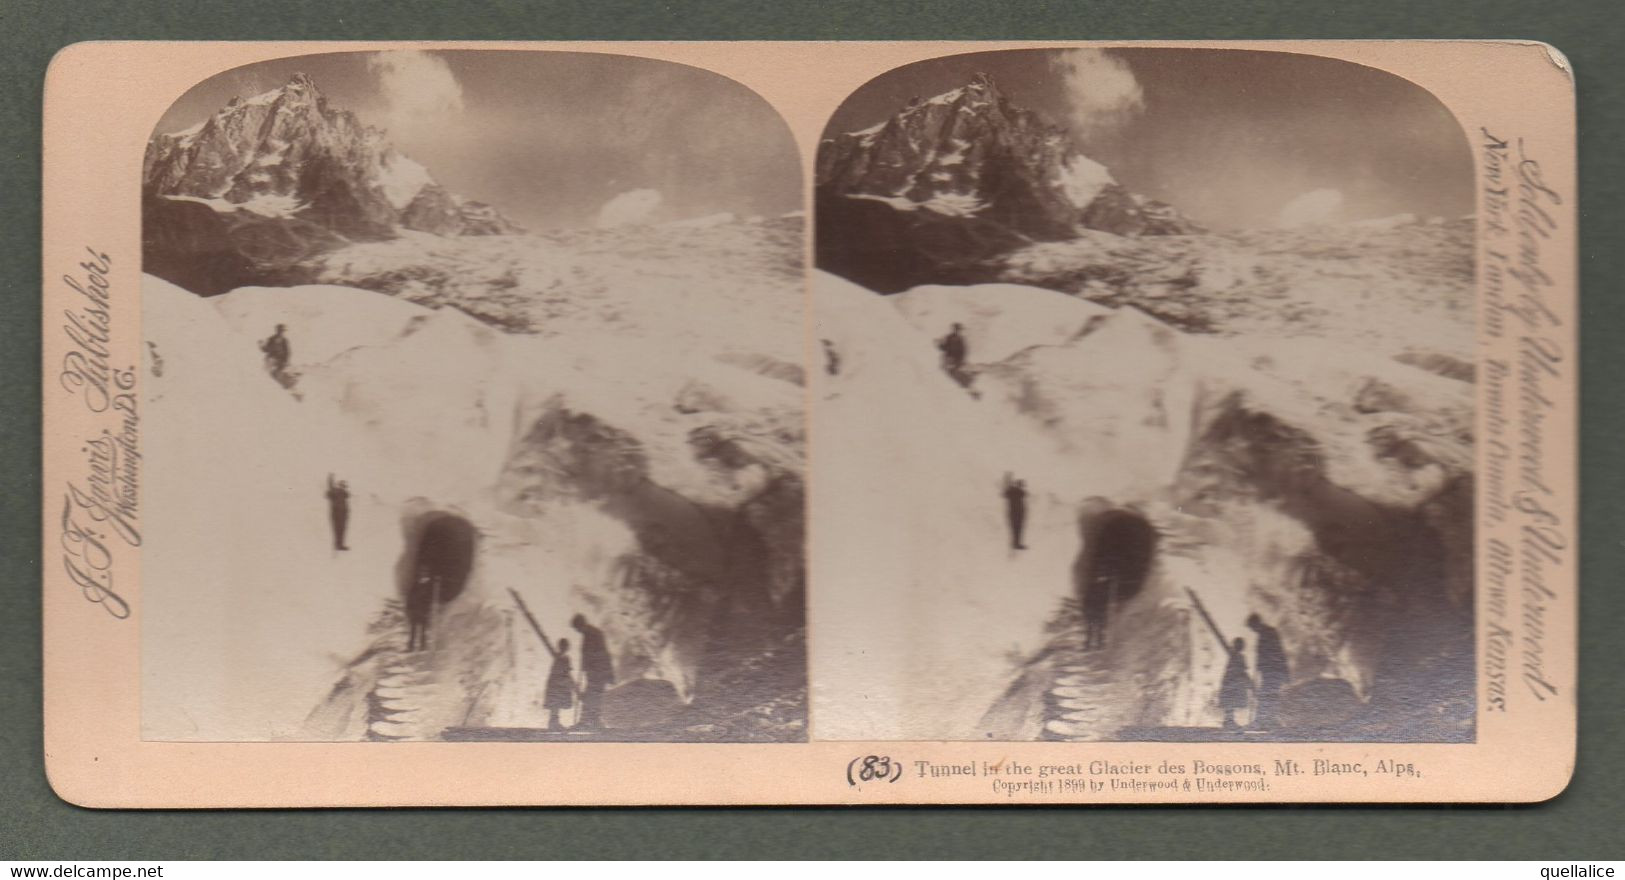 02157 "83-TUNNEL IN THE GREAT GLACER DES BOSSONS-MT. BLANC-ALPE-1899" STEREOSCOPICA ORIG. - Stereoscope Cards